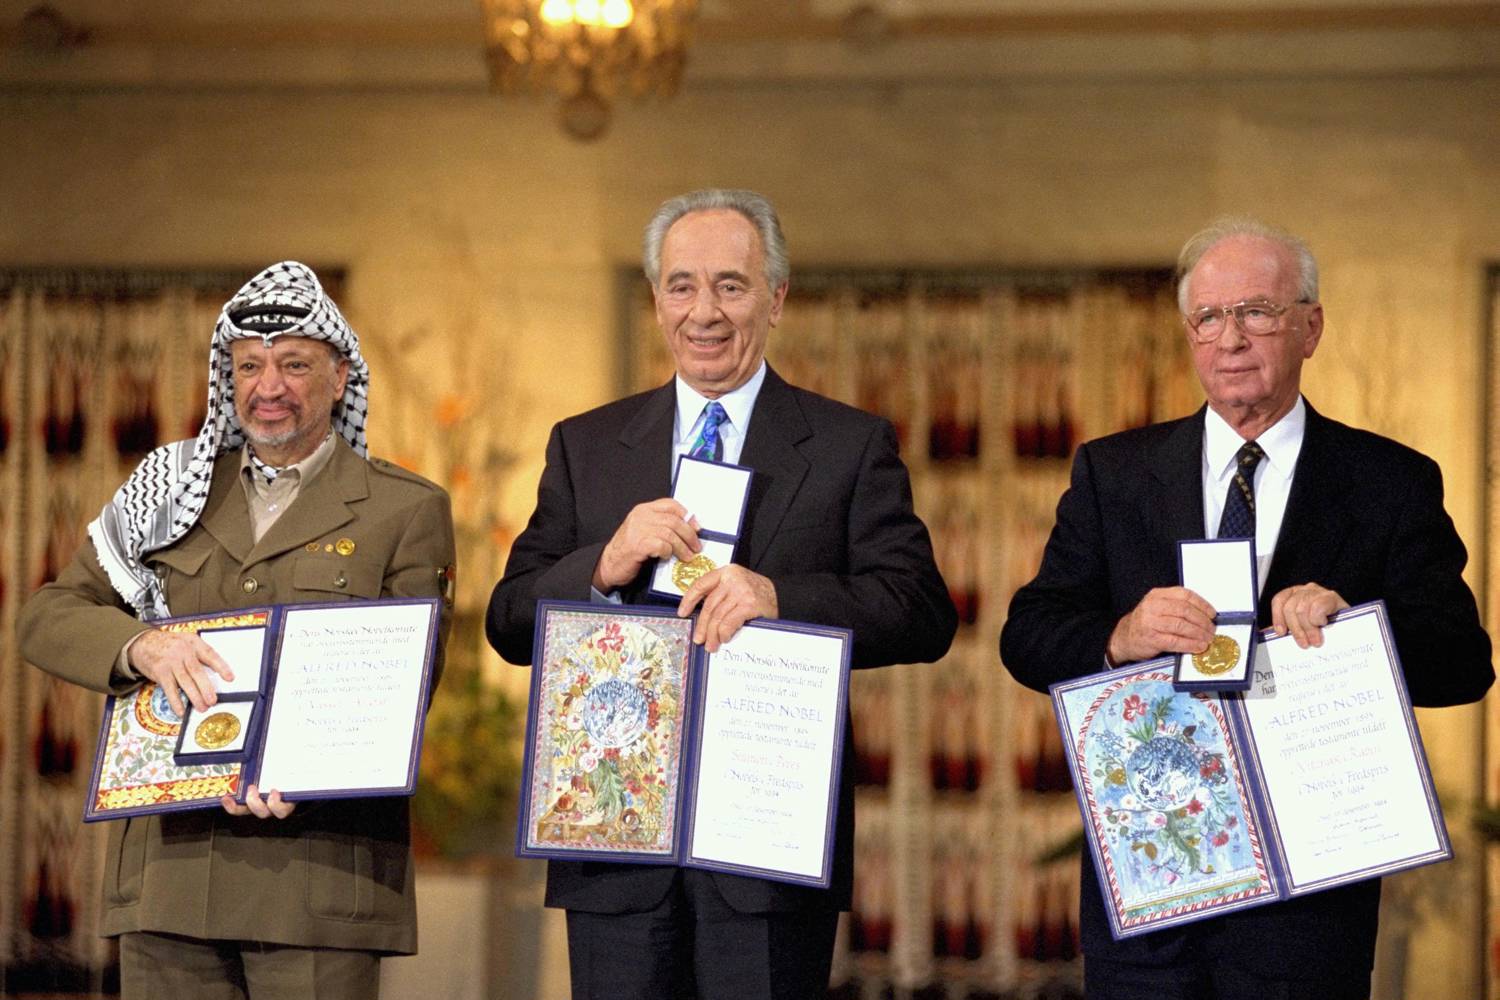 The Nobel Peace Prize laureates for 1994 in Oslo. From left to right: PLO Chairman Yasser Arafat, Israeli Foreign Minister Shimon Peres, Israeli Prime Minister Yitzhak Rabin. Photo: Saar Yaacov, Israeli Government Press Office. Photo: 